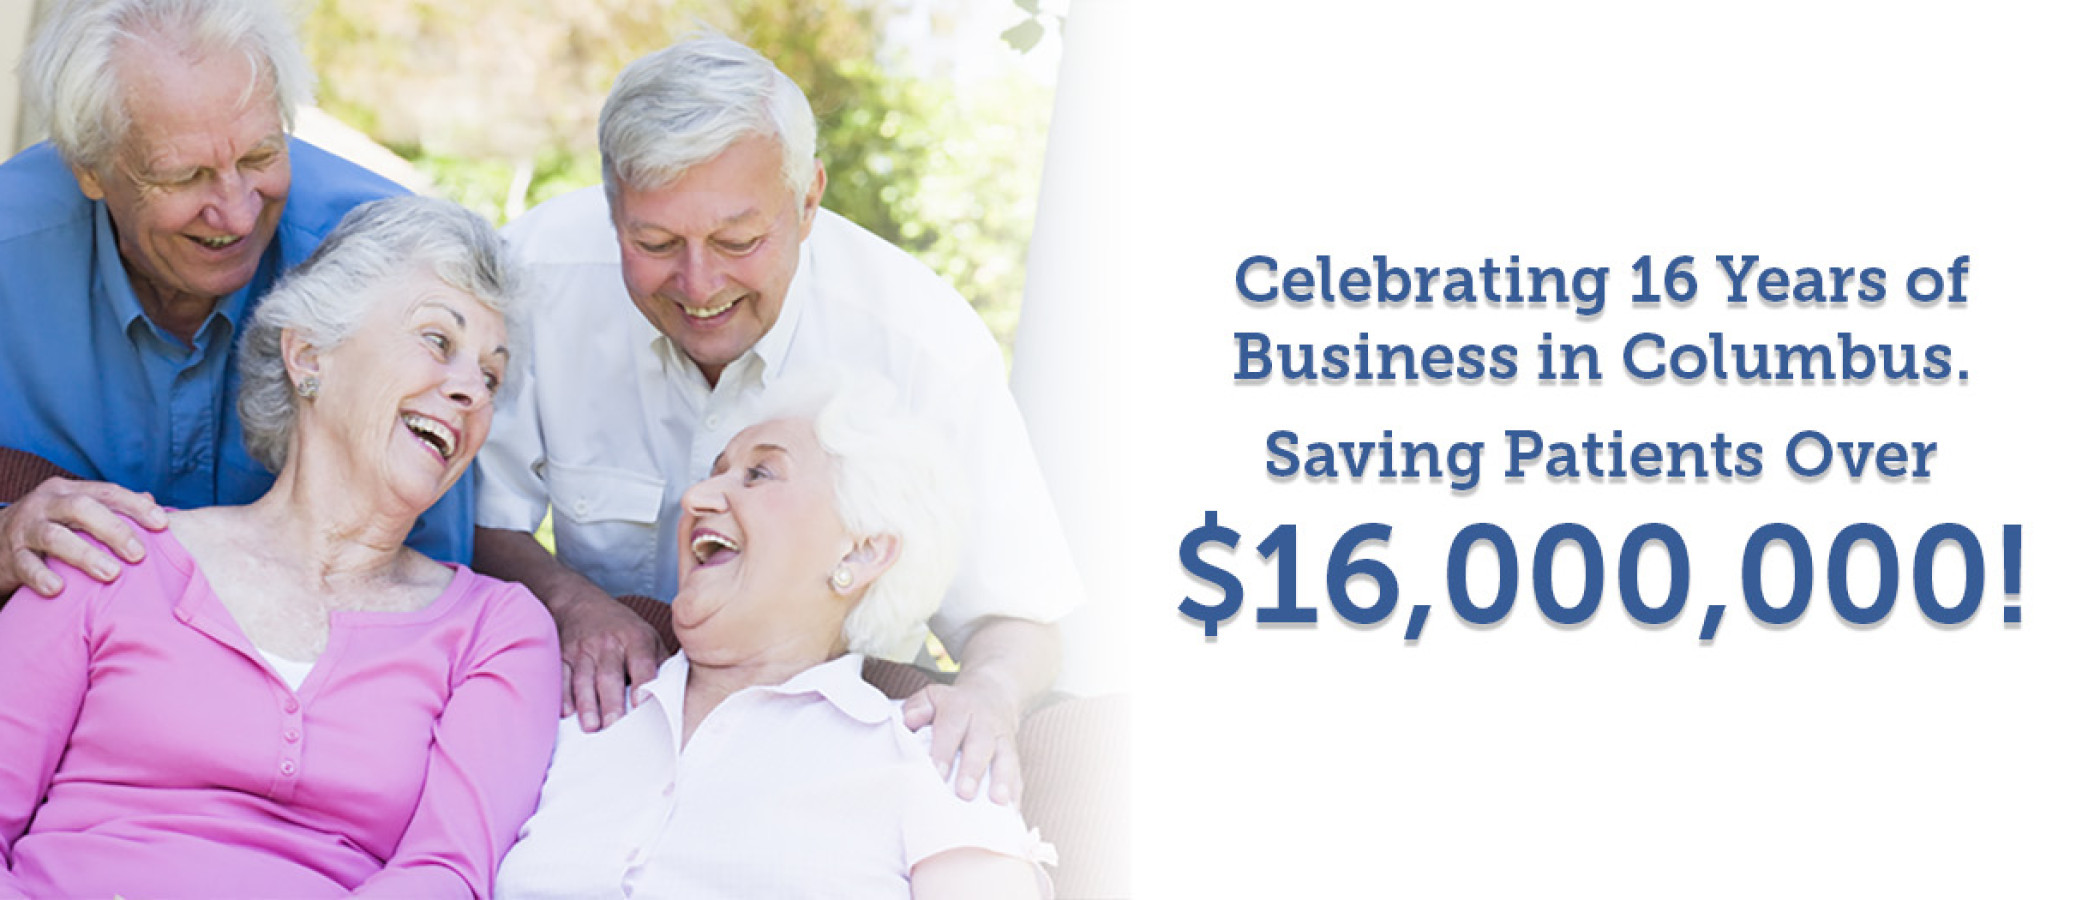 Celebrating 16 Years of Business in Columbus Saving Patients over $16,000,000